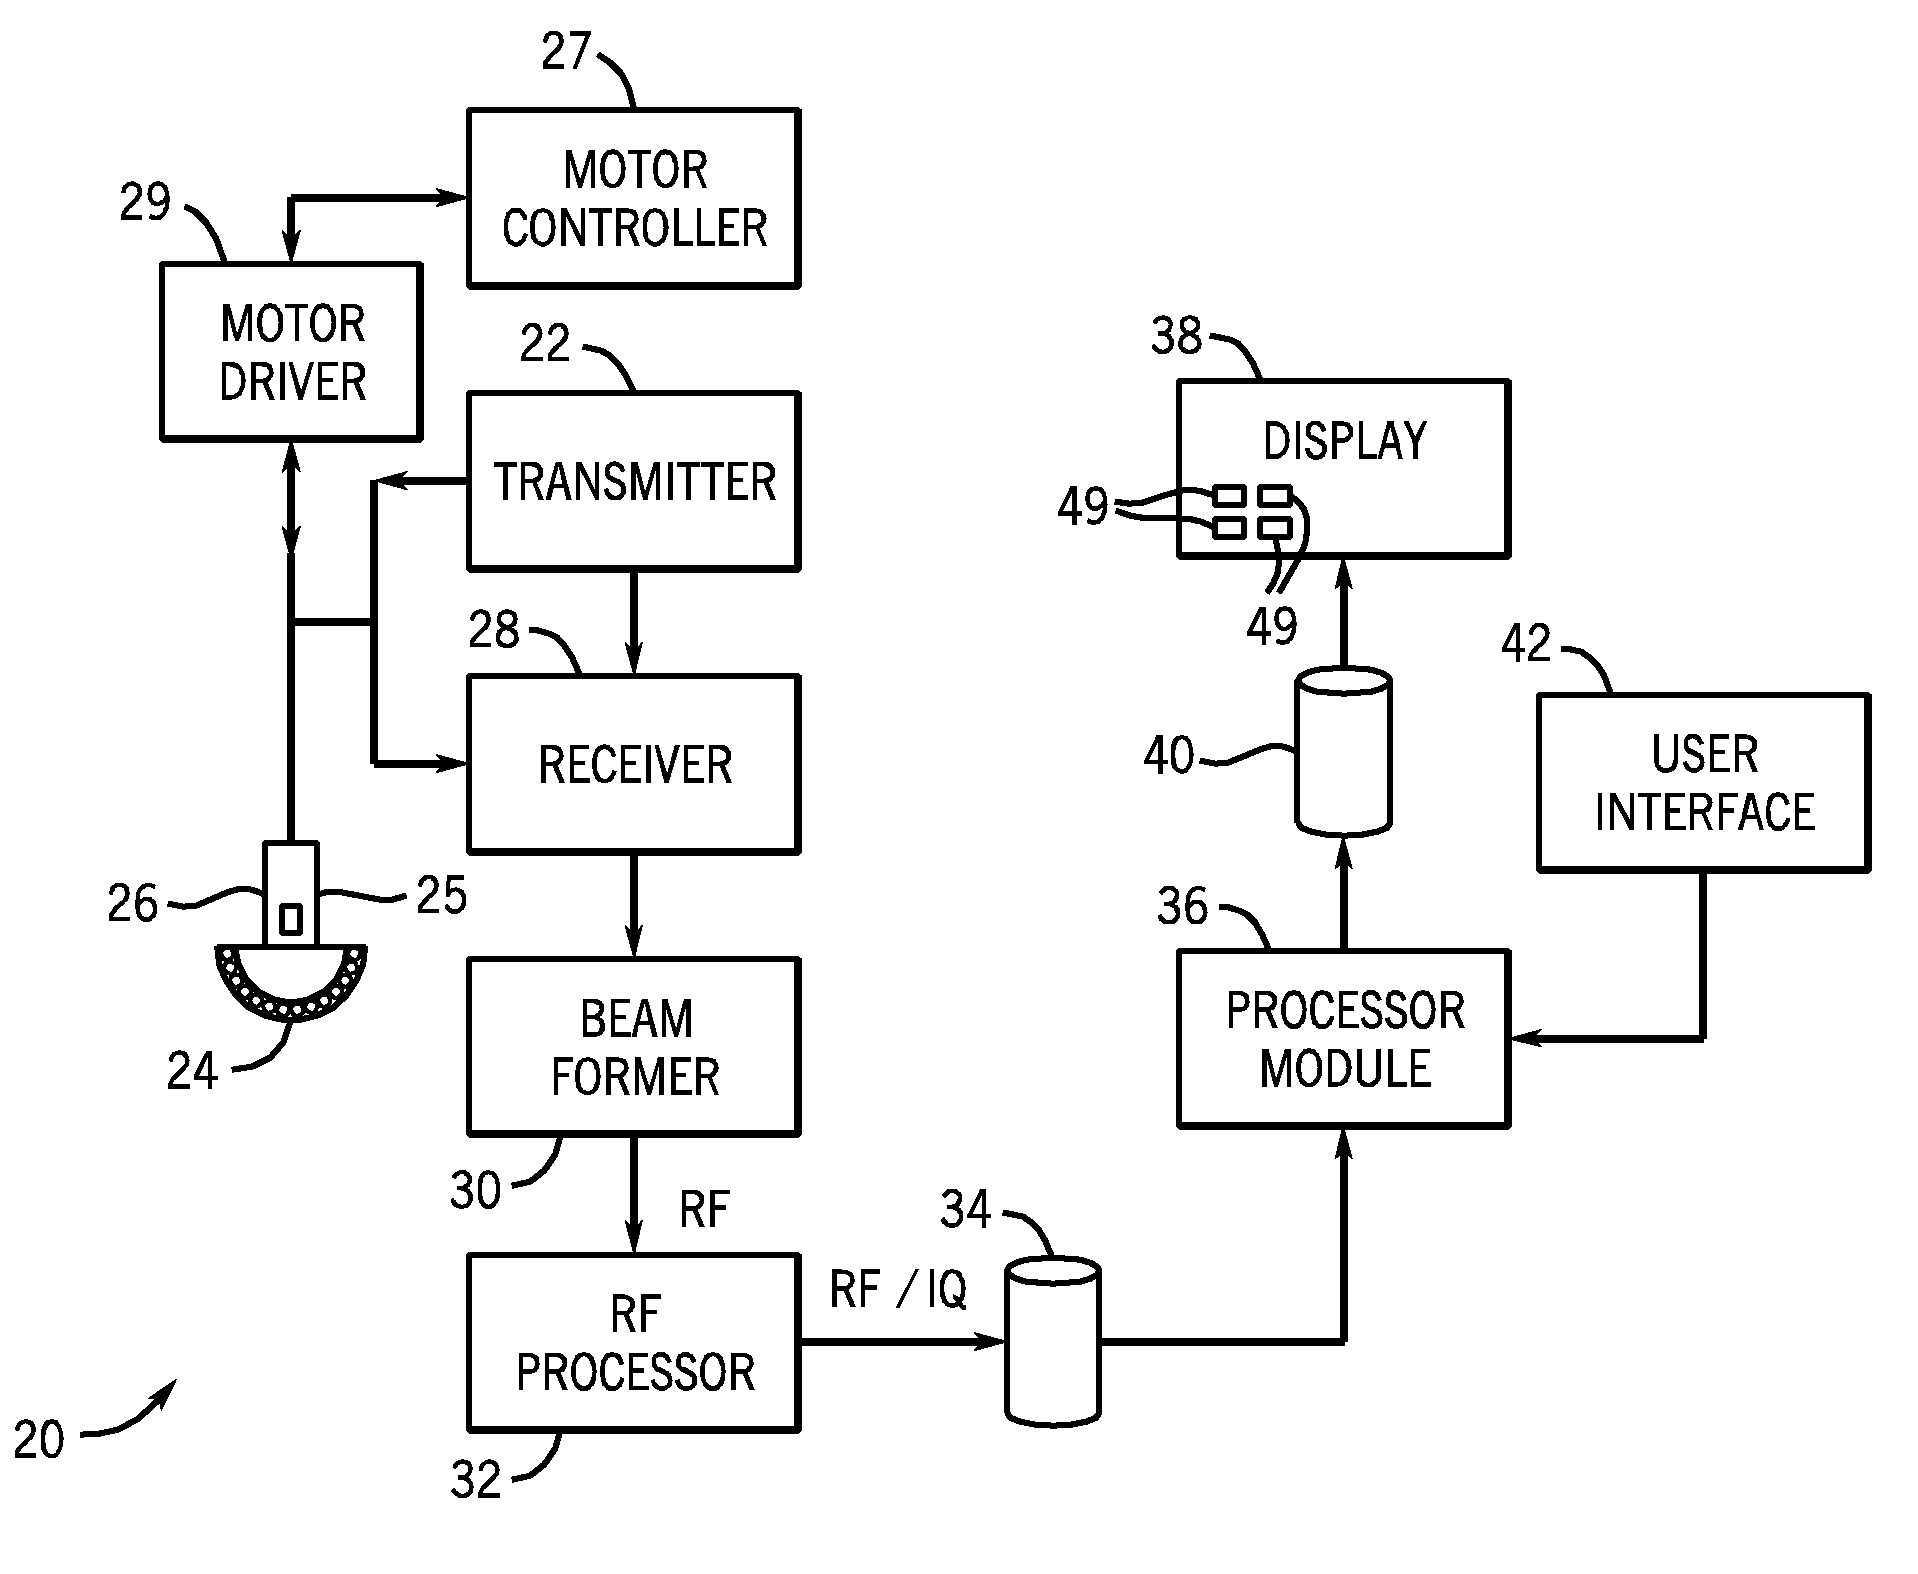 User interface for ultrasound system